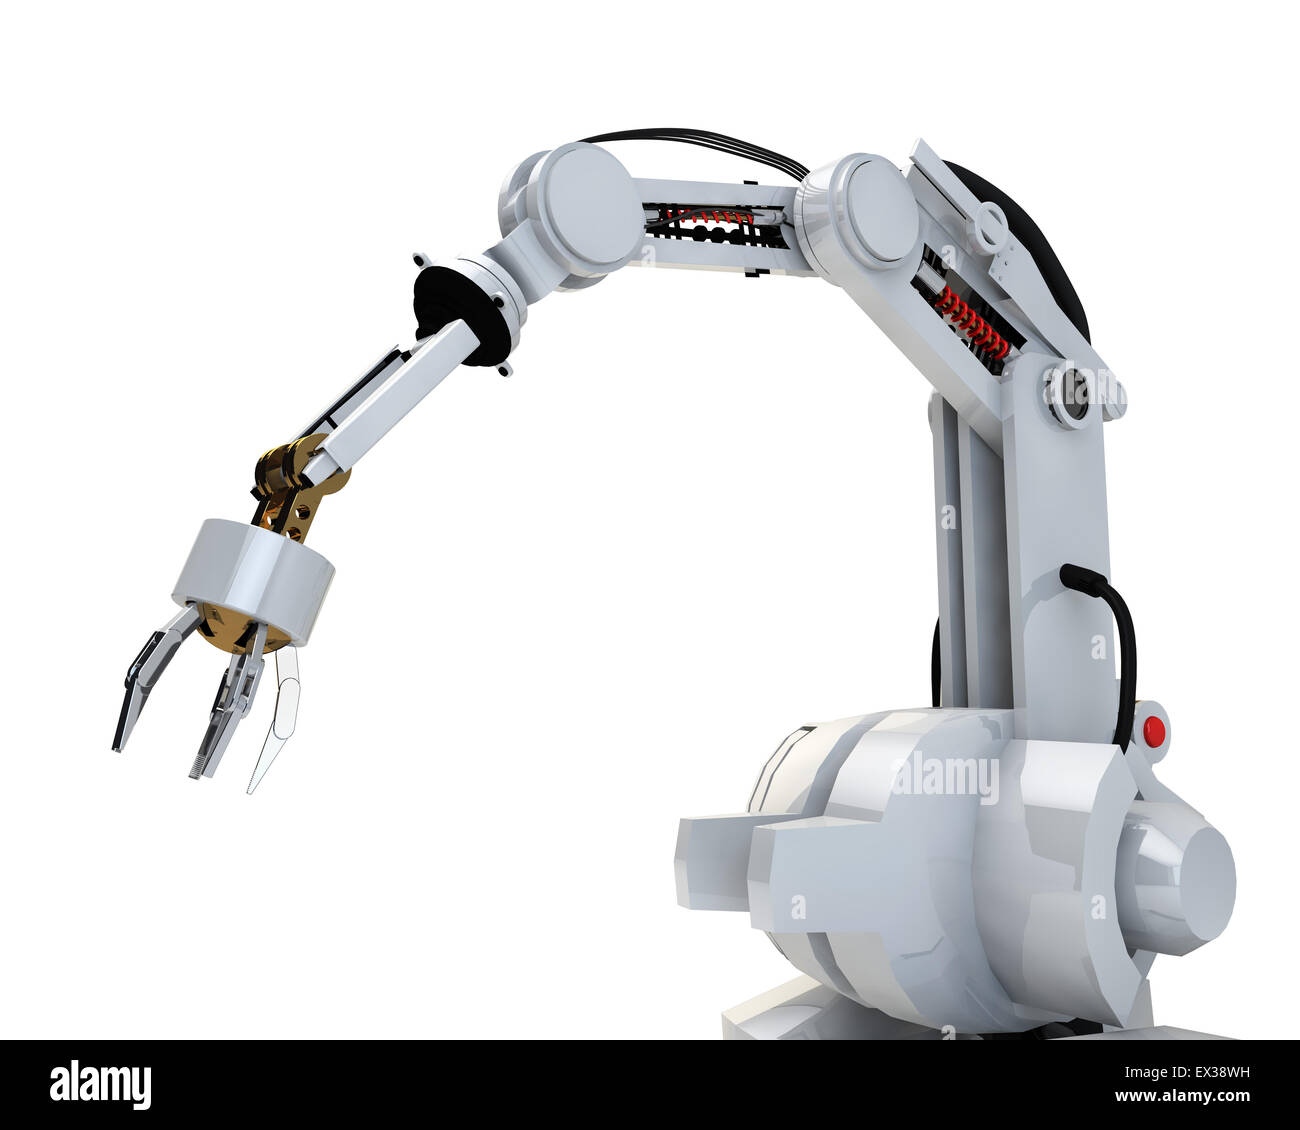 Robot arm Cut Out Stock Images & Pictures - Alamy